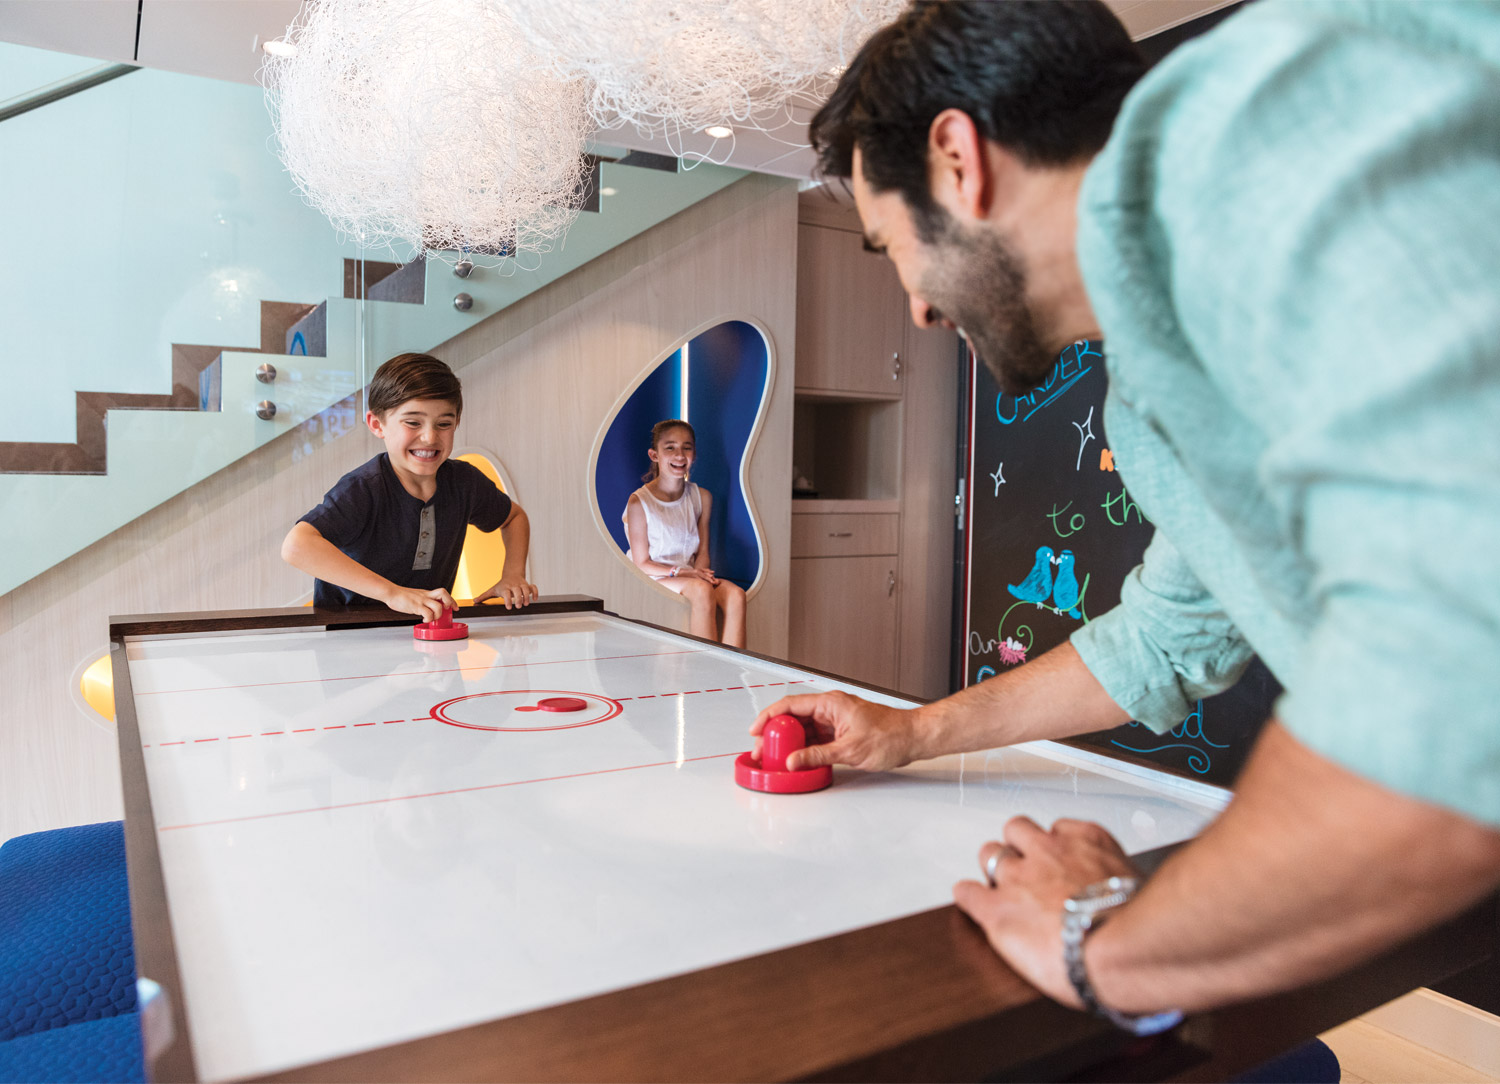  The Ultimate Family Suite, exclusively onboard <em>Symphony of the Seas</em>, features air-hockey, hidden nooks, a chalk wall, and many more delightful surprises!  